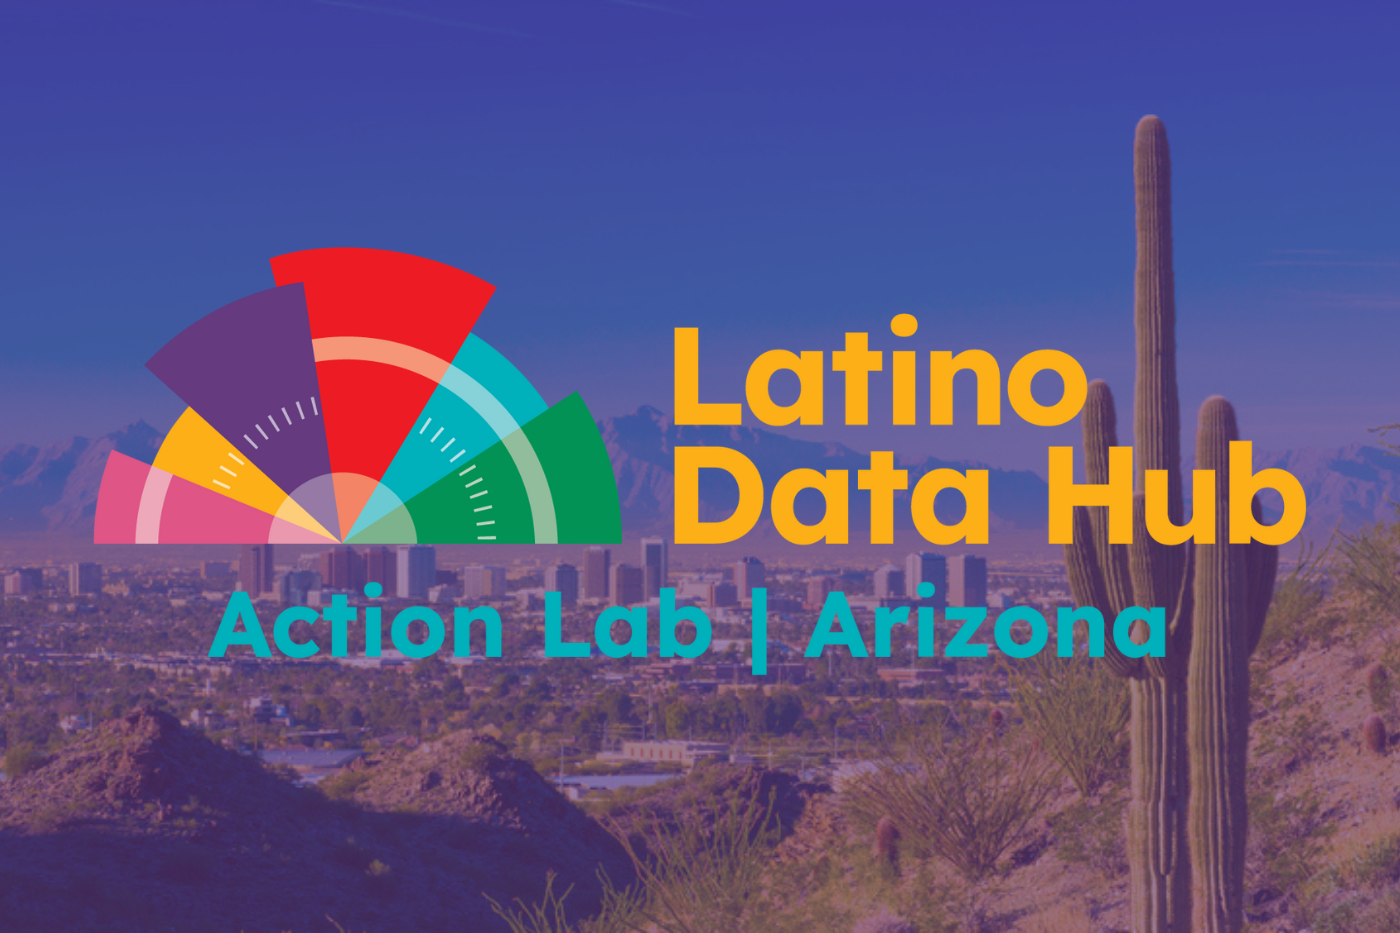 UCLA LPPI and ASU CLAPR Launch Initiative to Empower Latino Leaders Through Data-Driven Advocacy